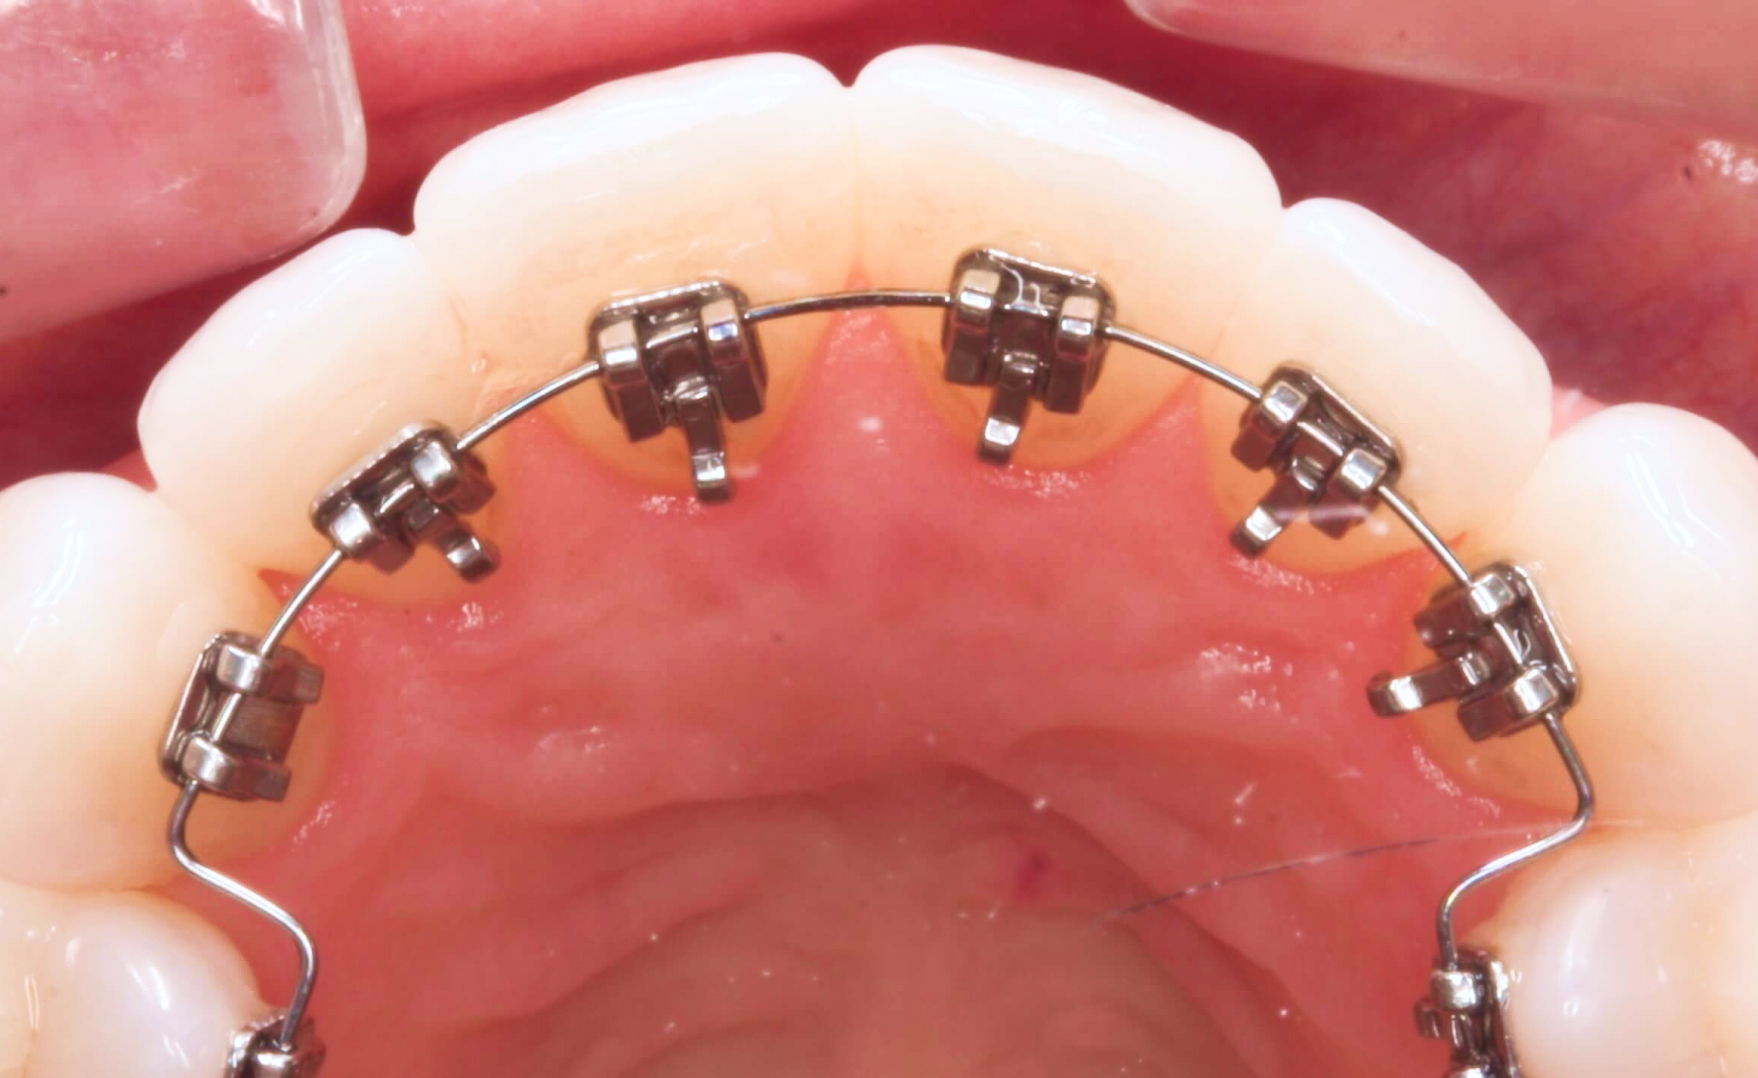 Inside mouth view of dental work